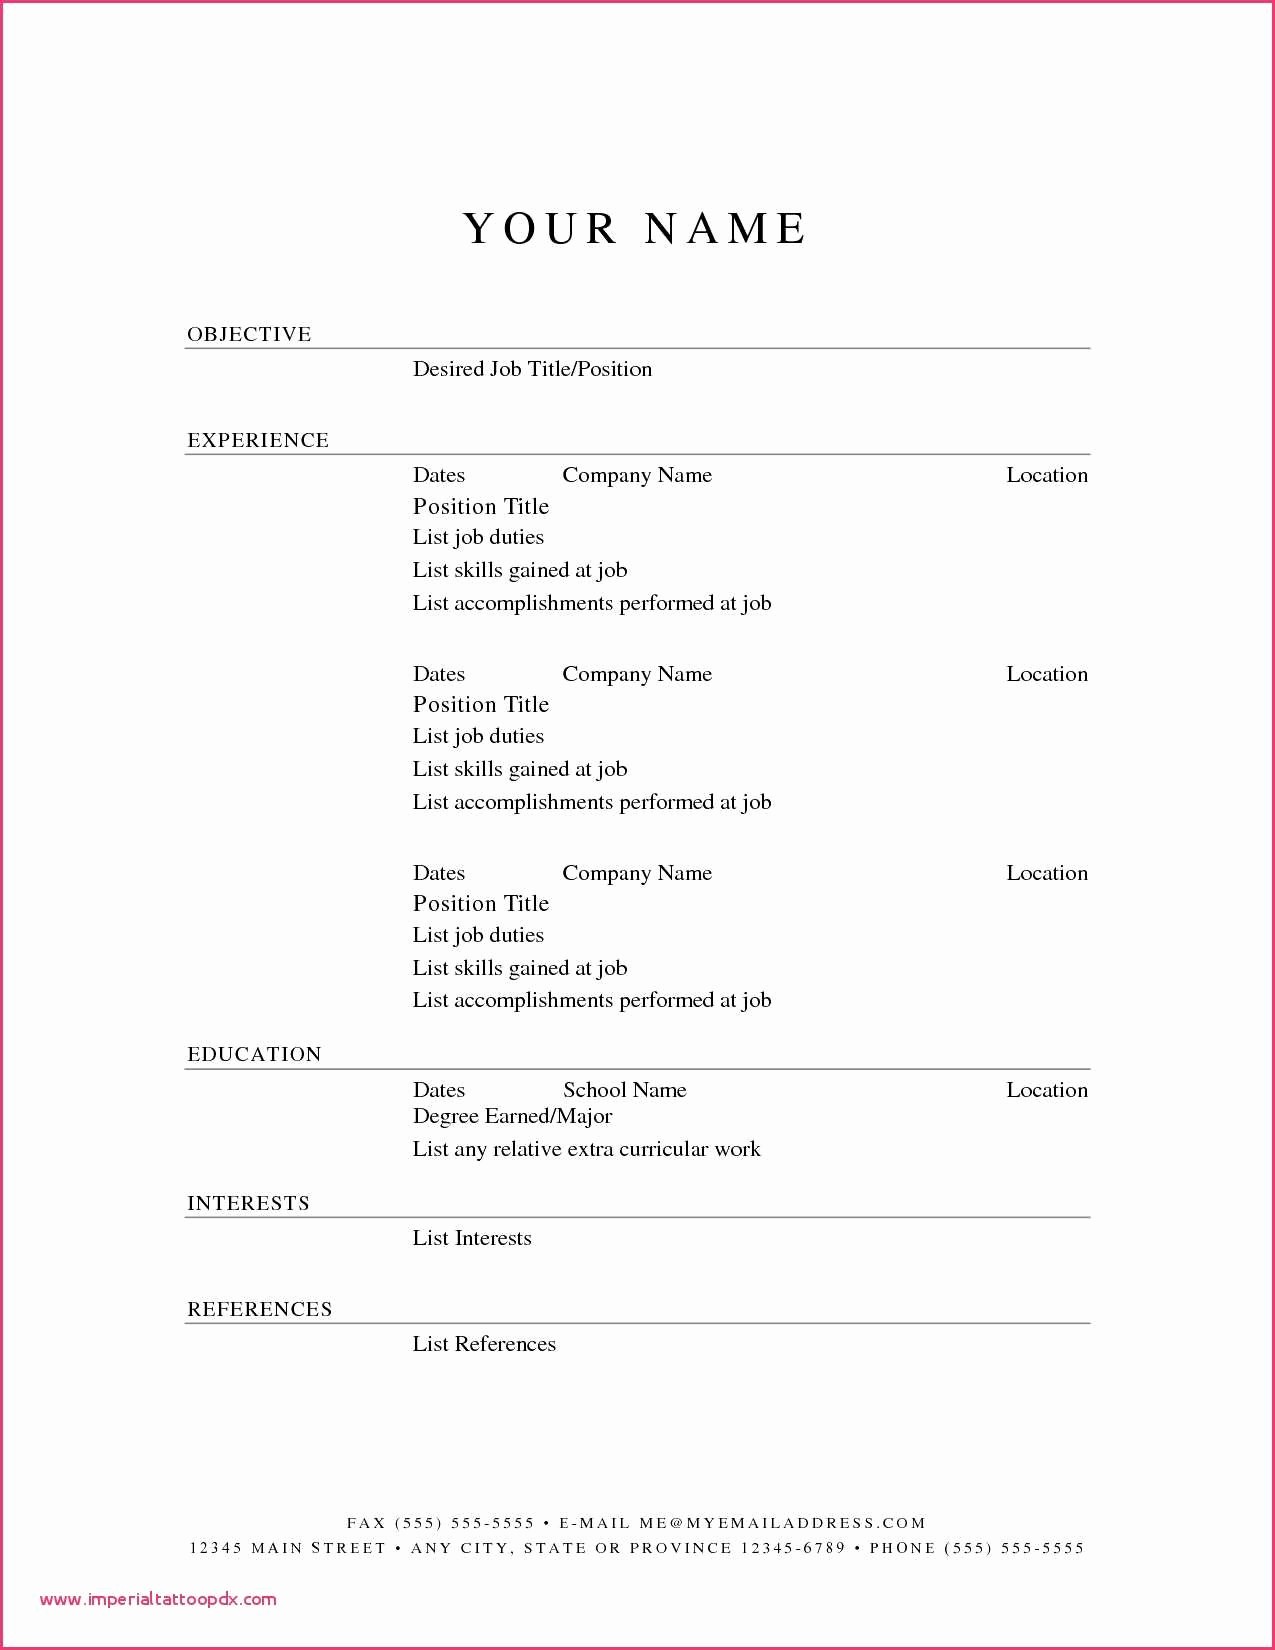 Resume Template Microsoft Word 2007 New 46 Resume Template Download for Microsoft Word 2007